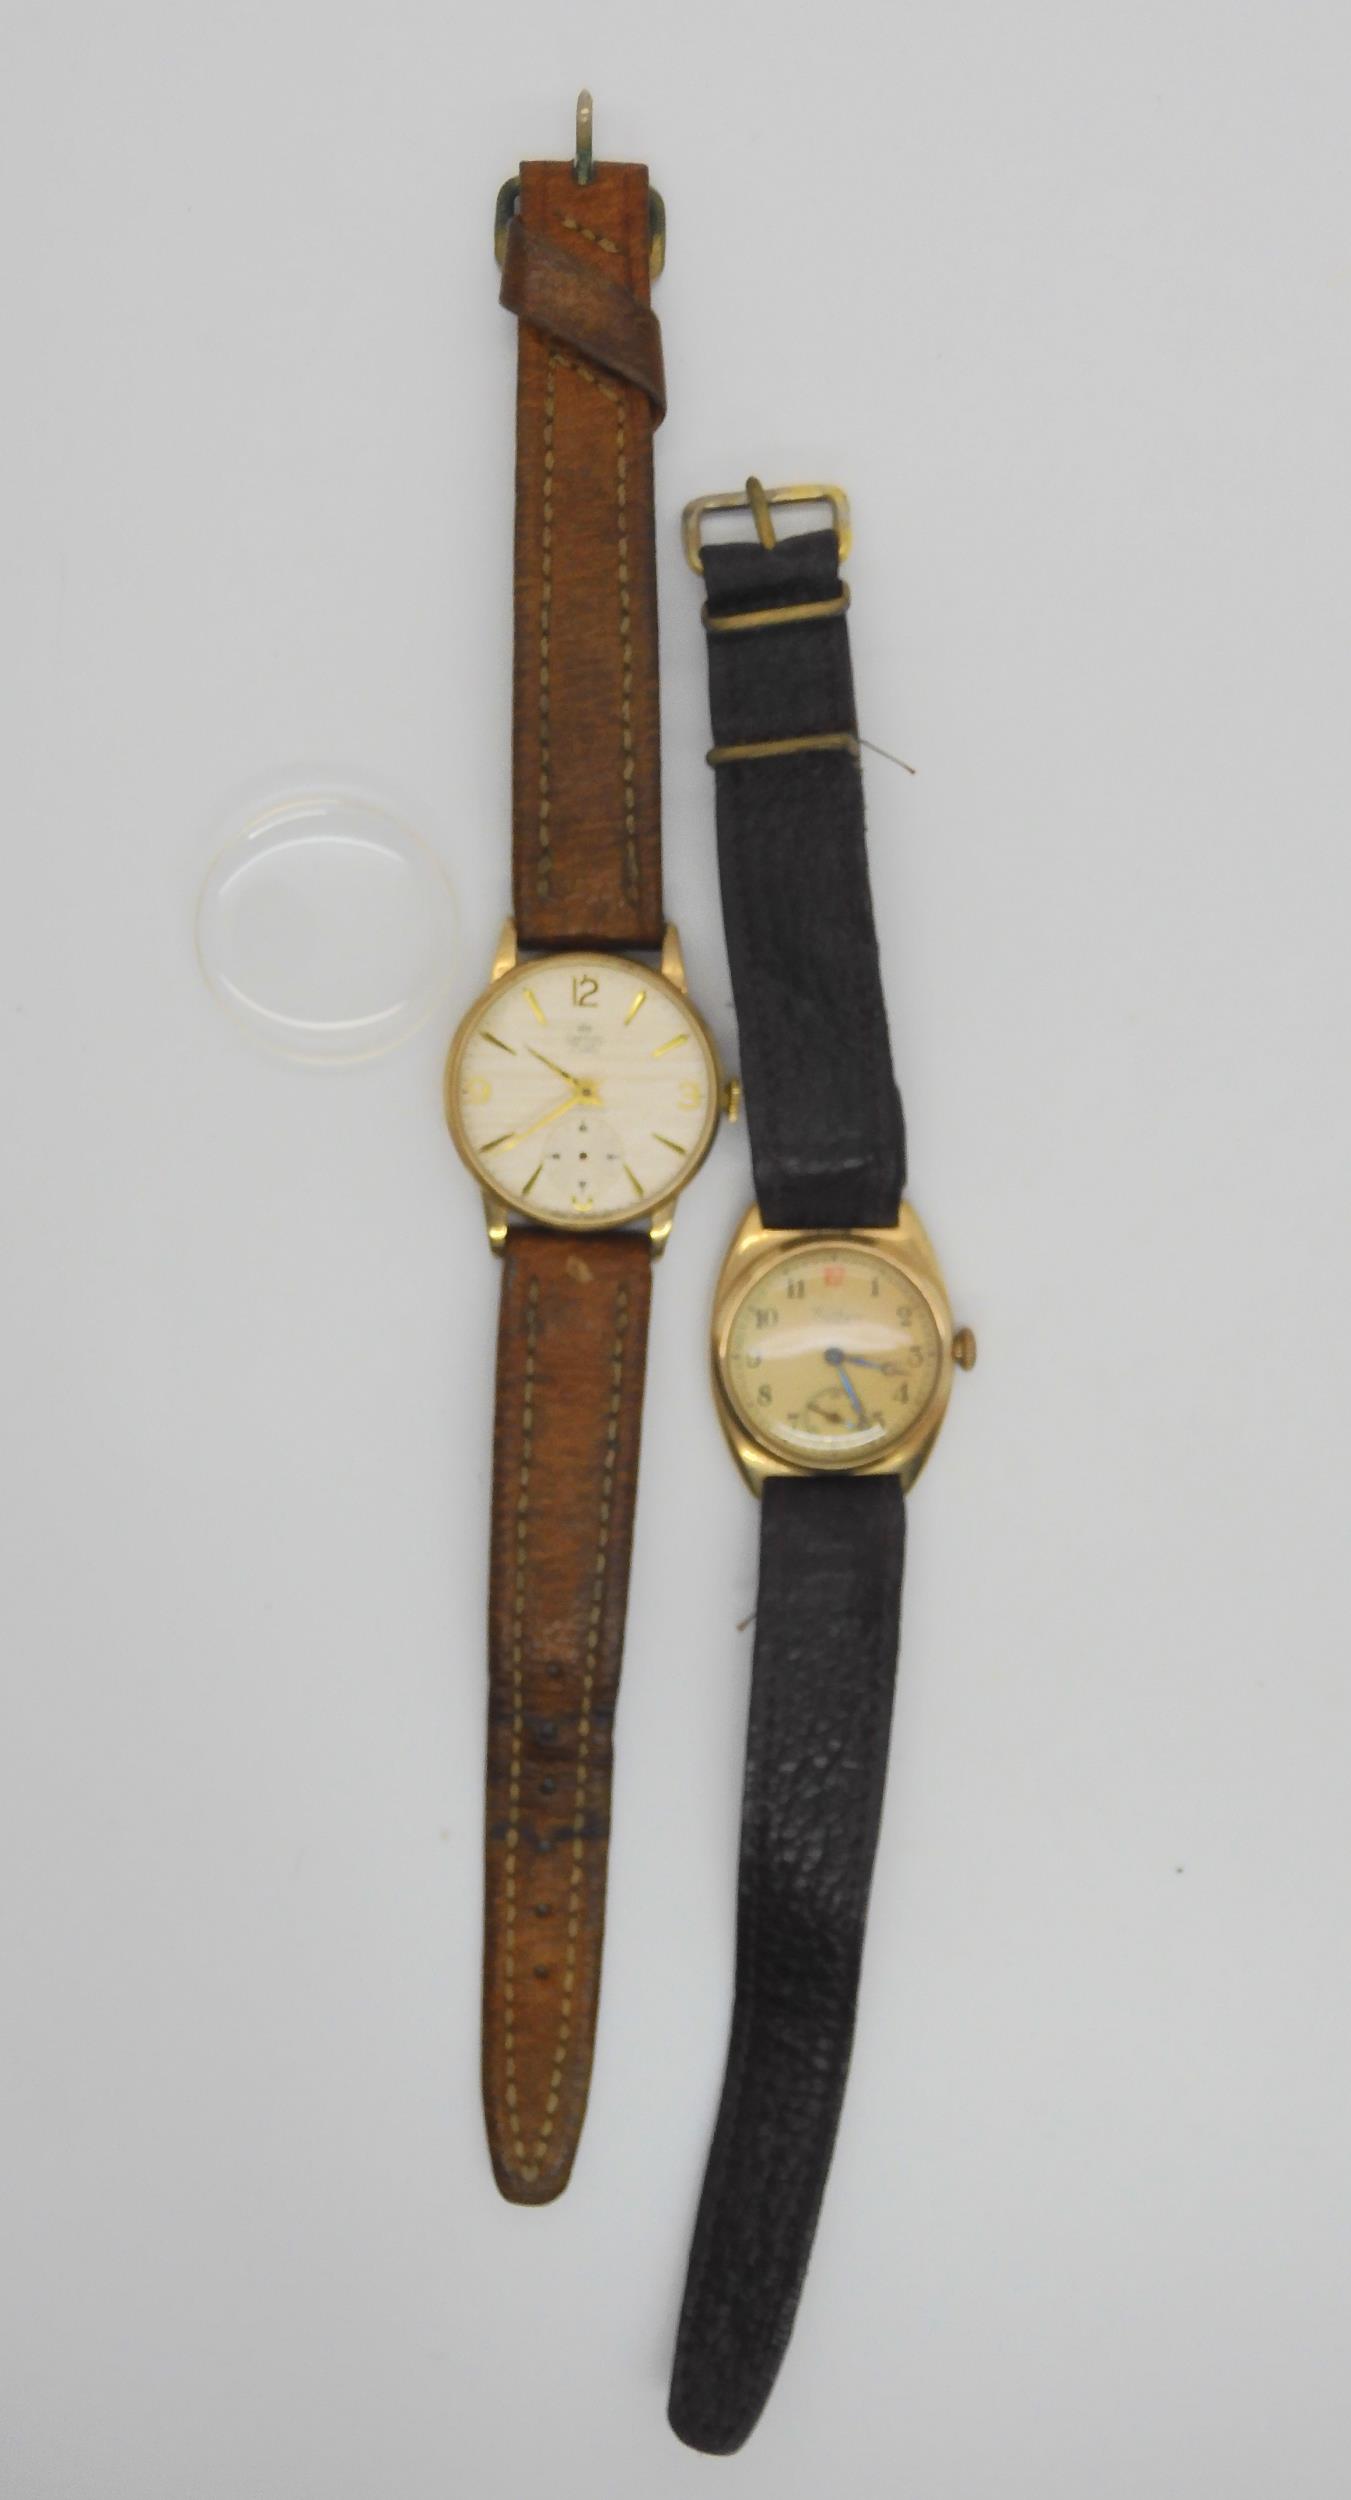 A Smiths 9ct De Luxe 15 jewel retro wrist watch (af) in original box together with aÊA 9ct Waltham